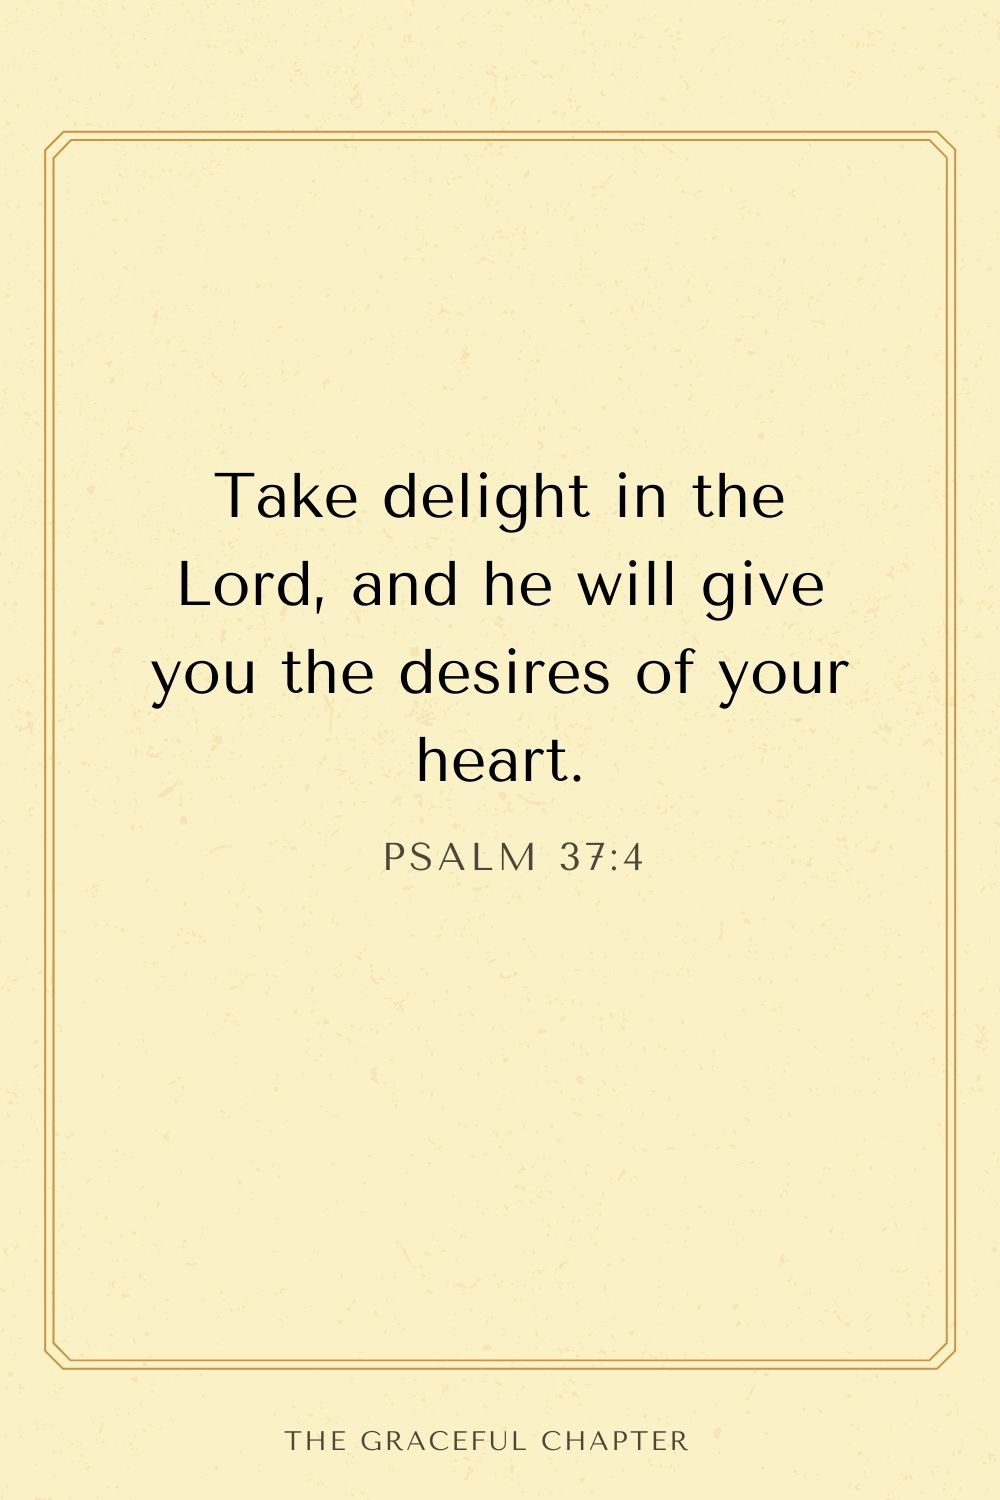 Take delight in the Lord, and he will give you the desires of your heart. Psalm 37:4